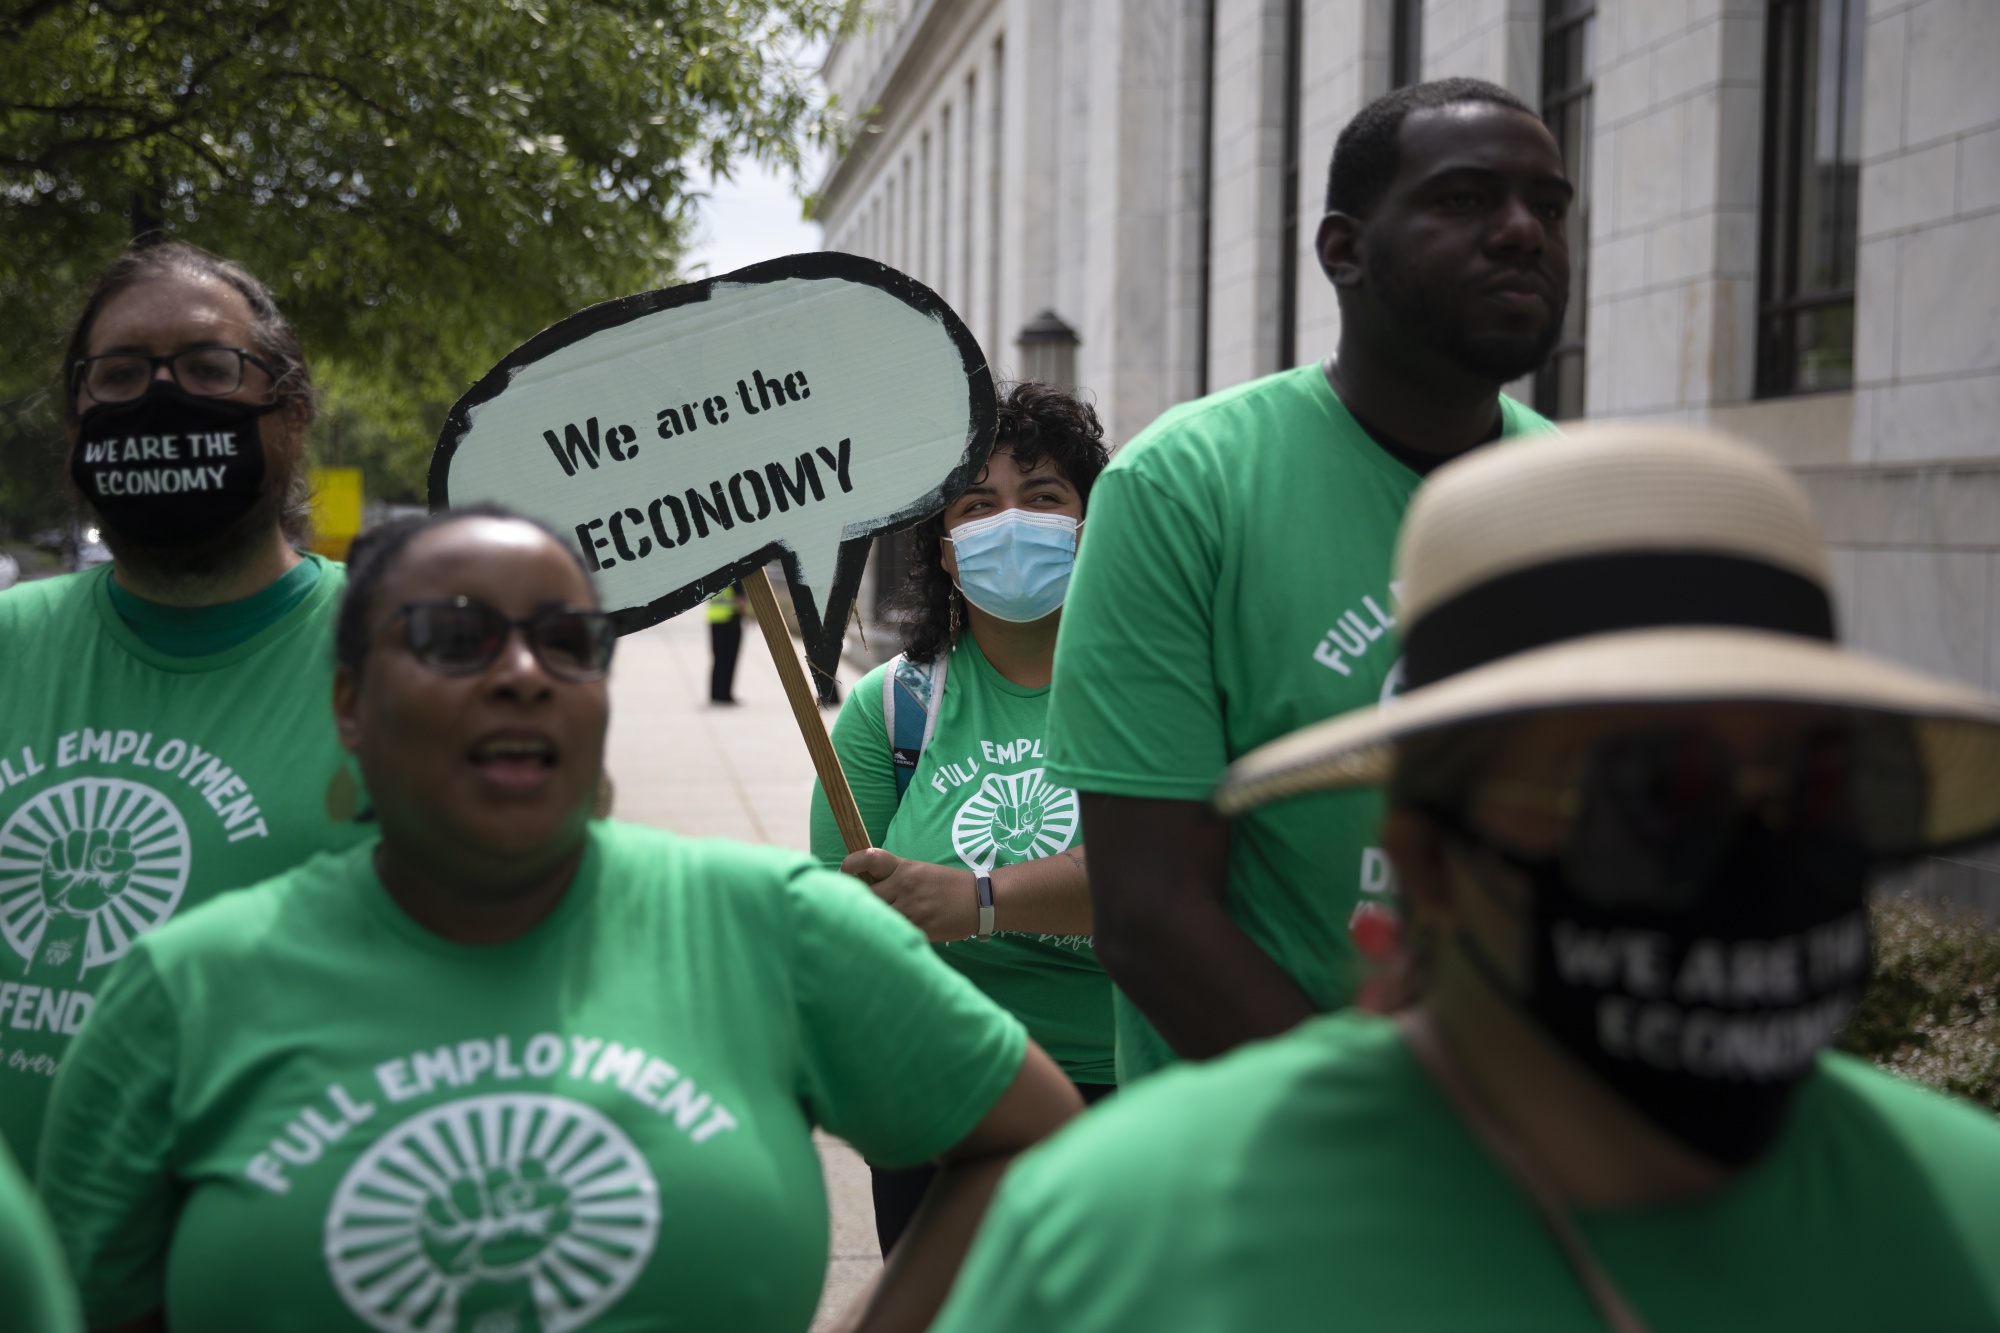 Protesters during a “Stakeout for Full Employment” demonstration outside the Federal Reserve building in Washington, on June 14.